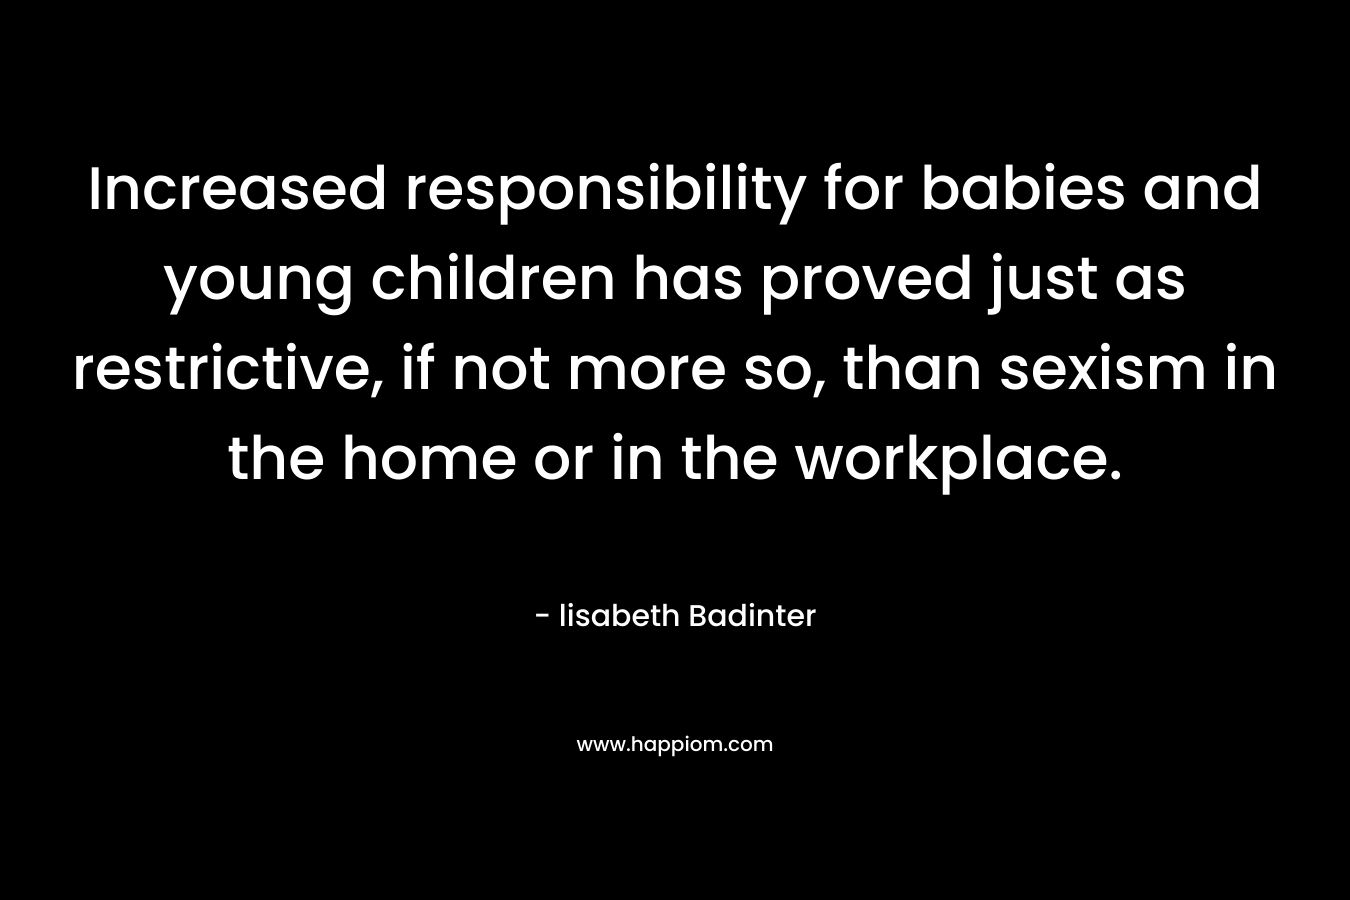 Increased responsibility for babies and young children has proved just as restrictive, if not more so, than sexism in the home or in the workplace. – lisabeth Badinter